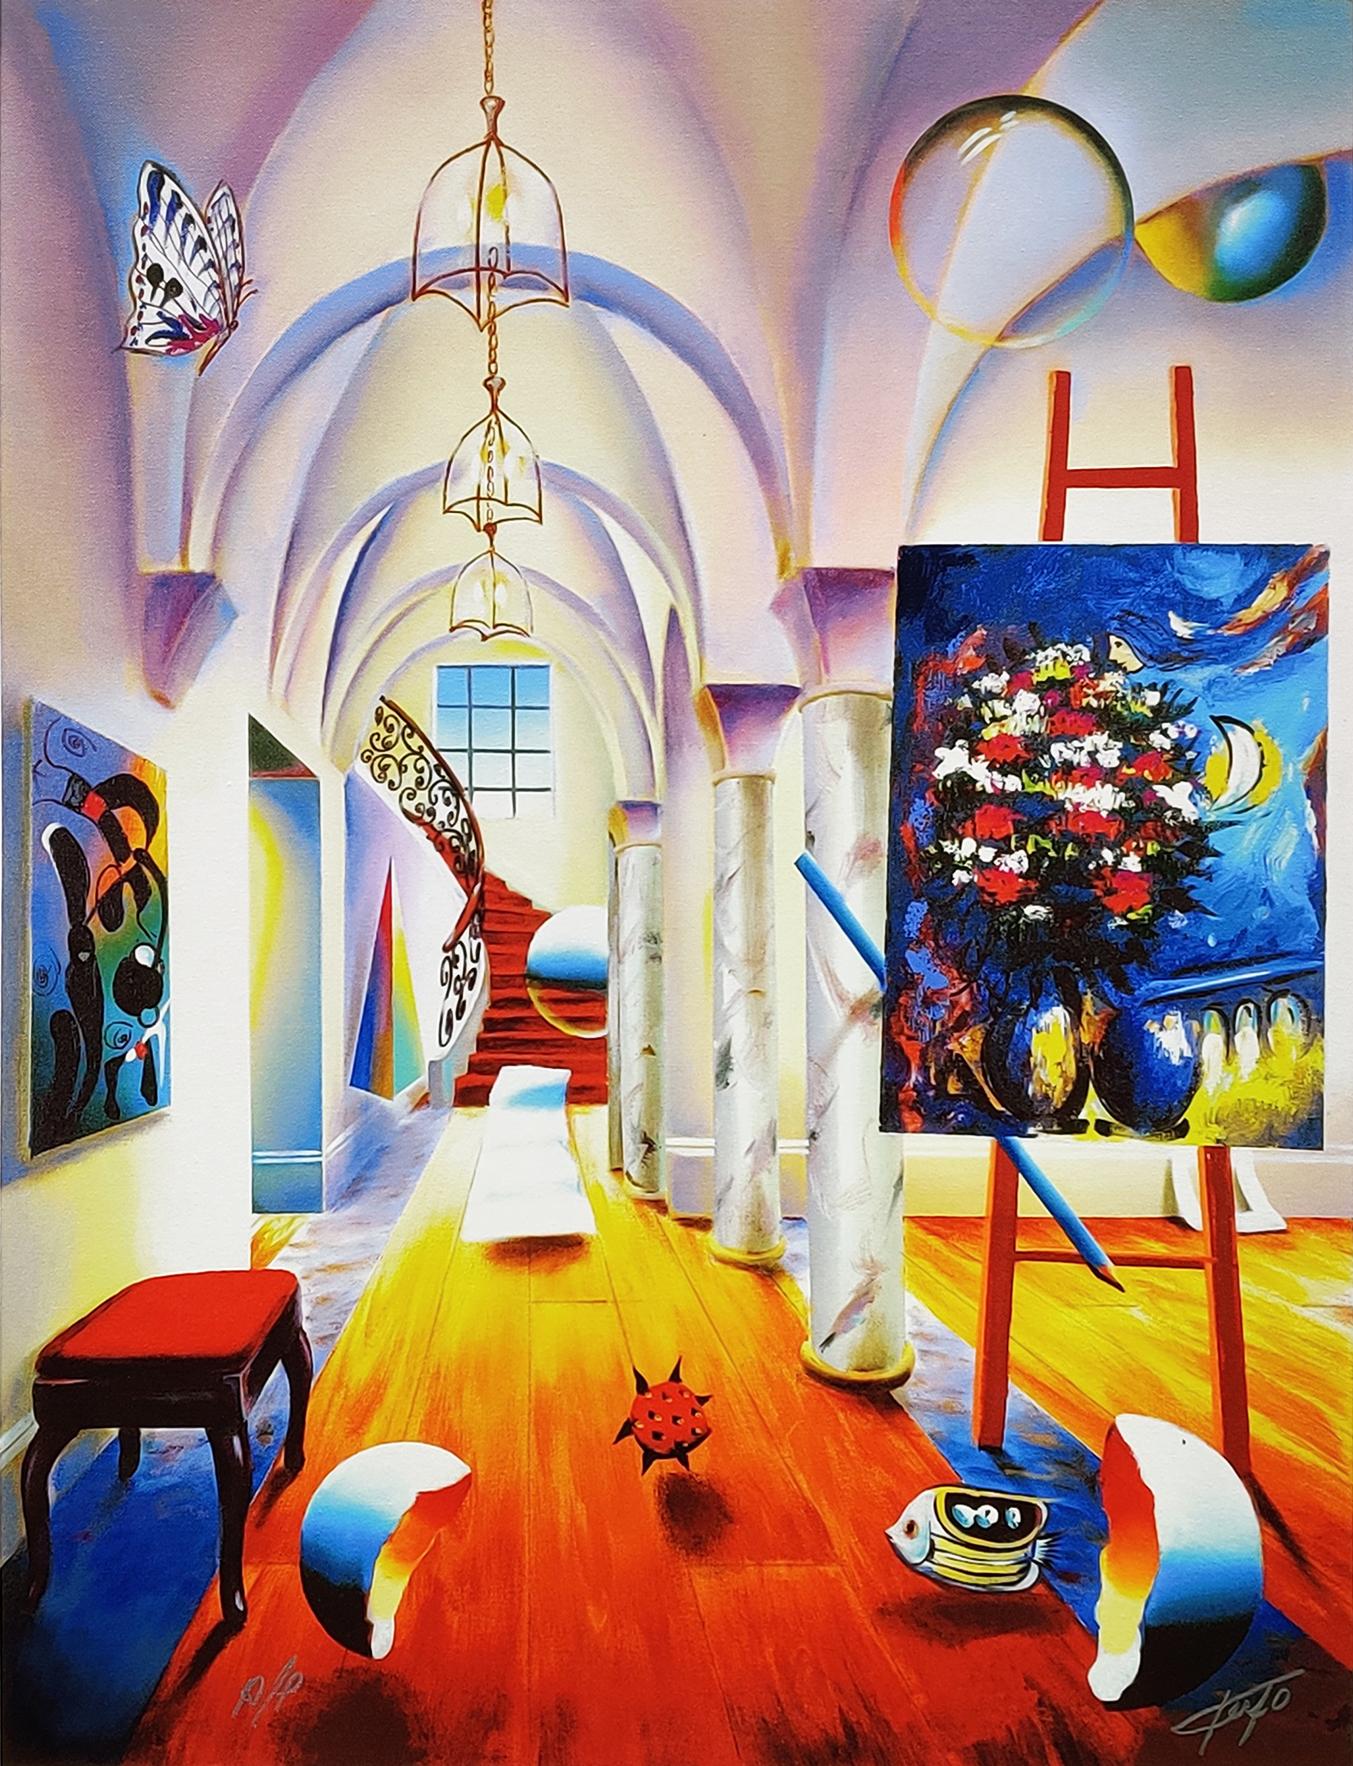 COLONNES IMPÉRIALES (MIRO CHAGALL)